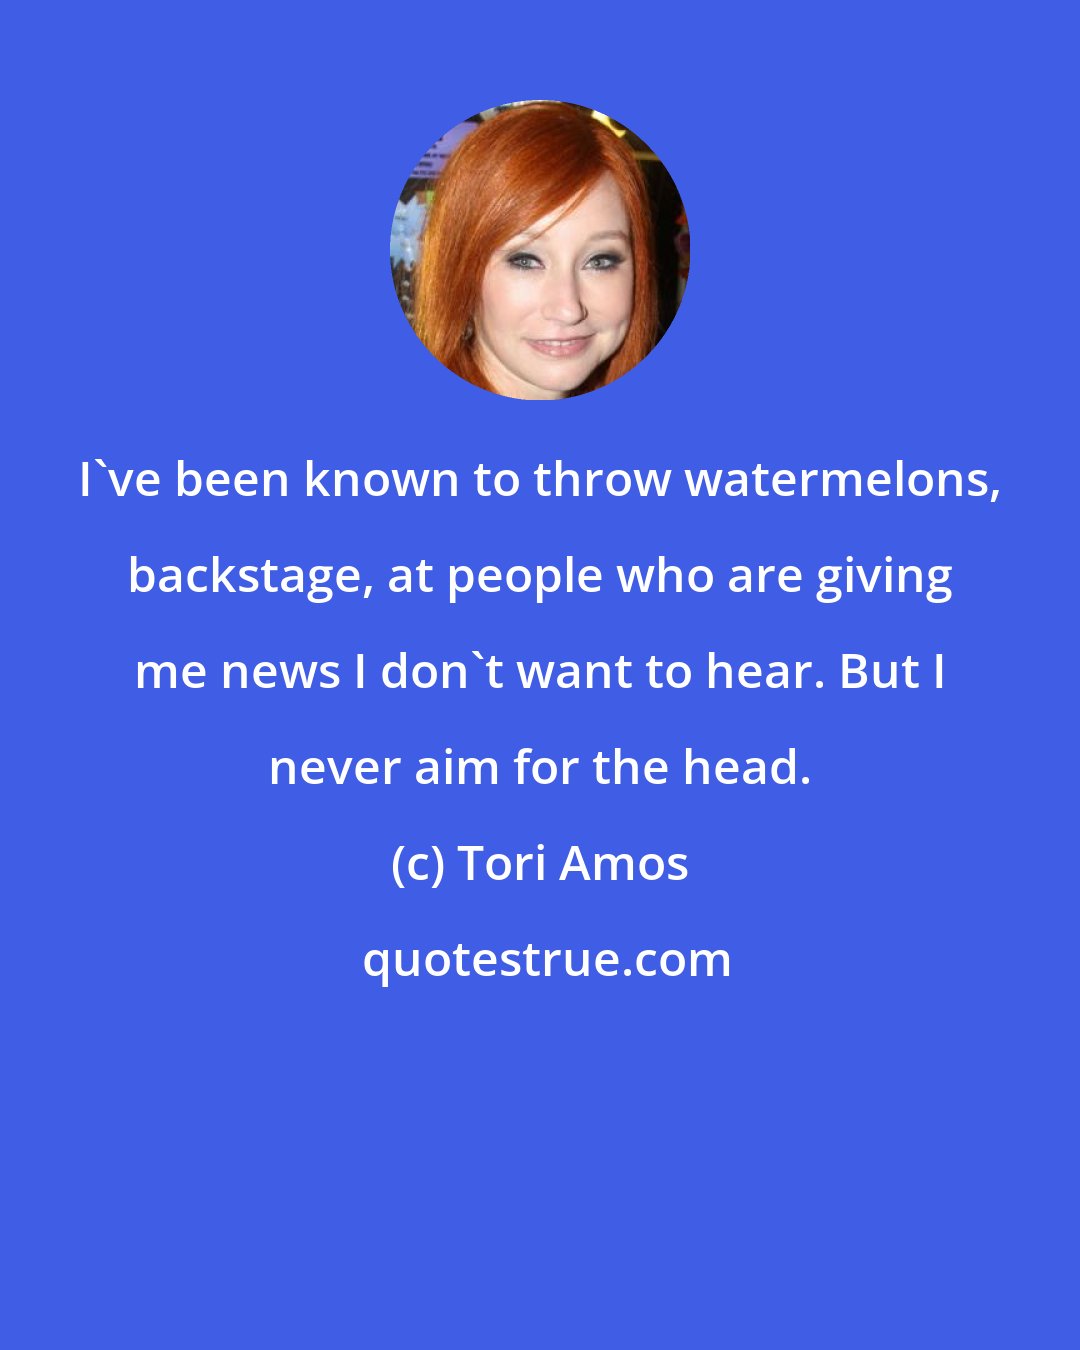 Tori Amos: I've been known to throw watermelons, backstage, at people who are giving me news I don't want to hear. But I never aim for the head.